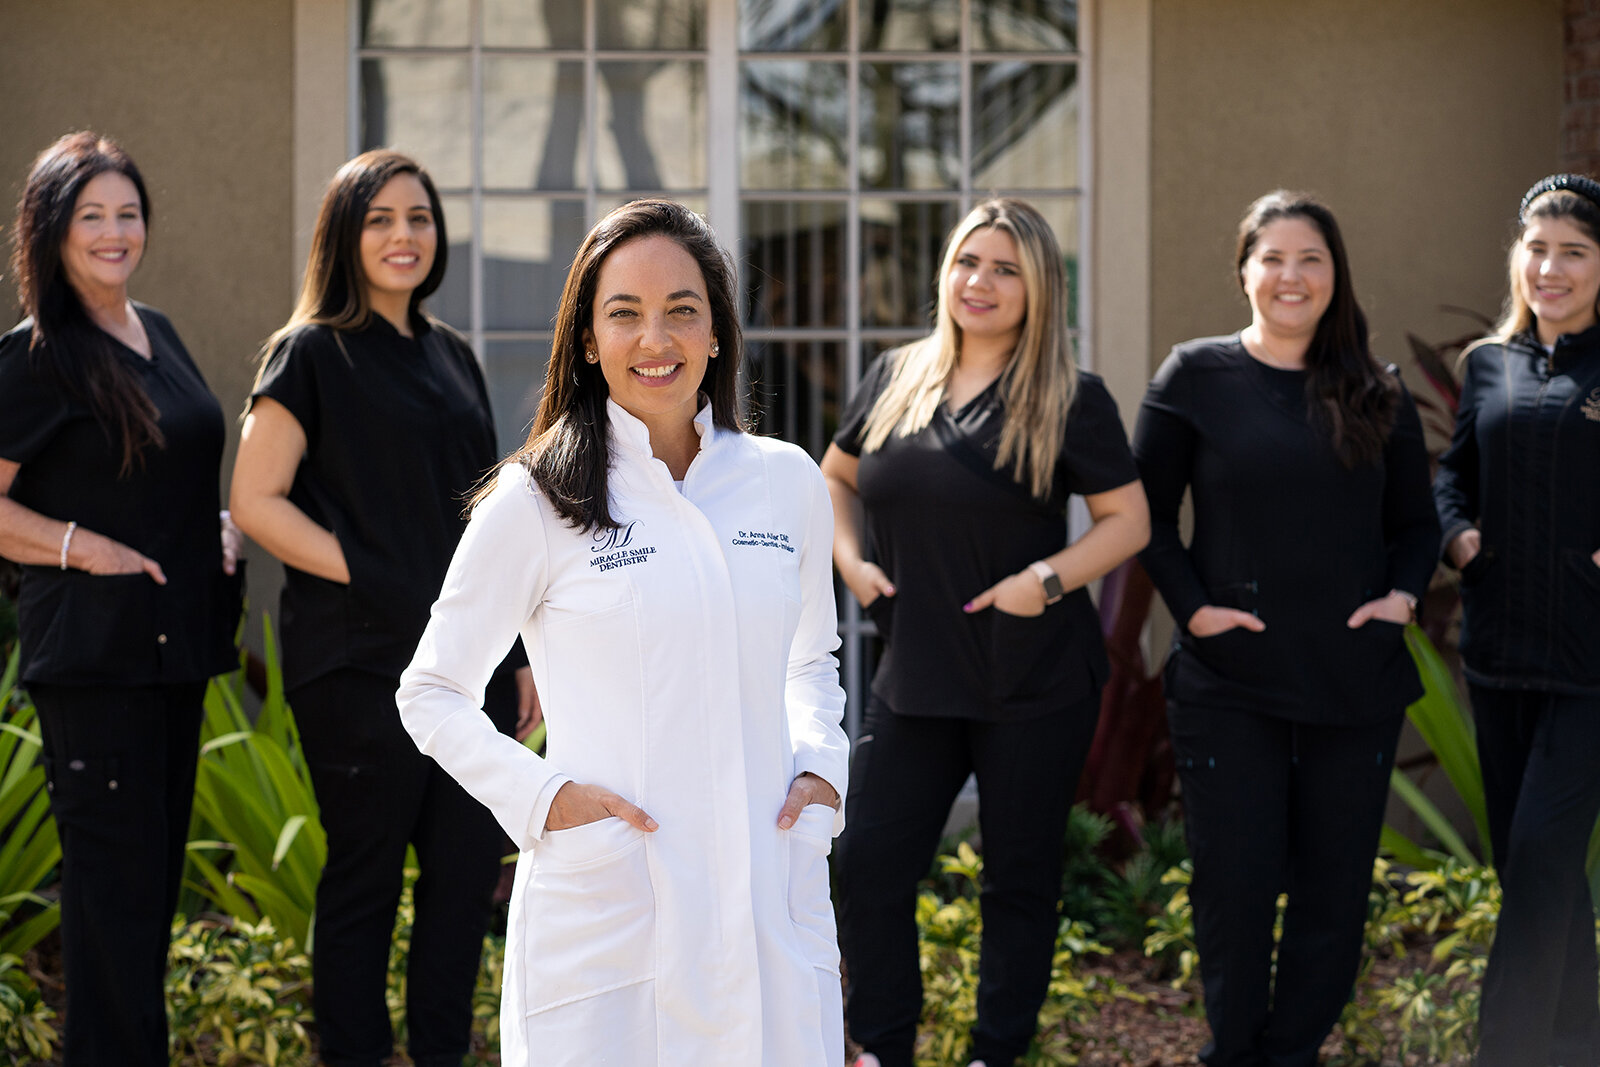 Miracle Smile Dentistry - Dental Clinic in Plantation